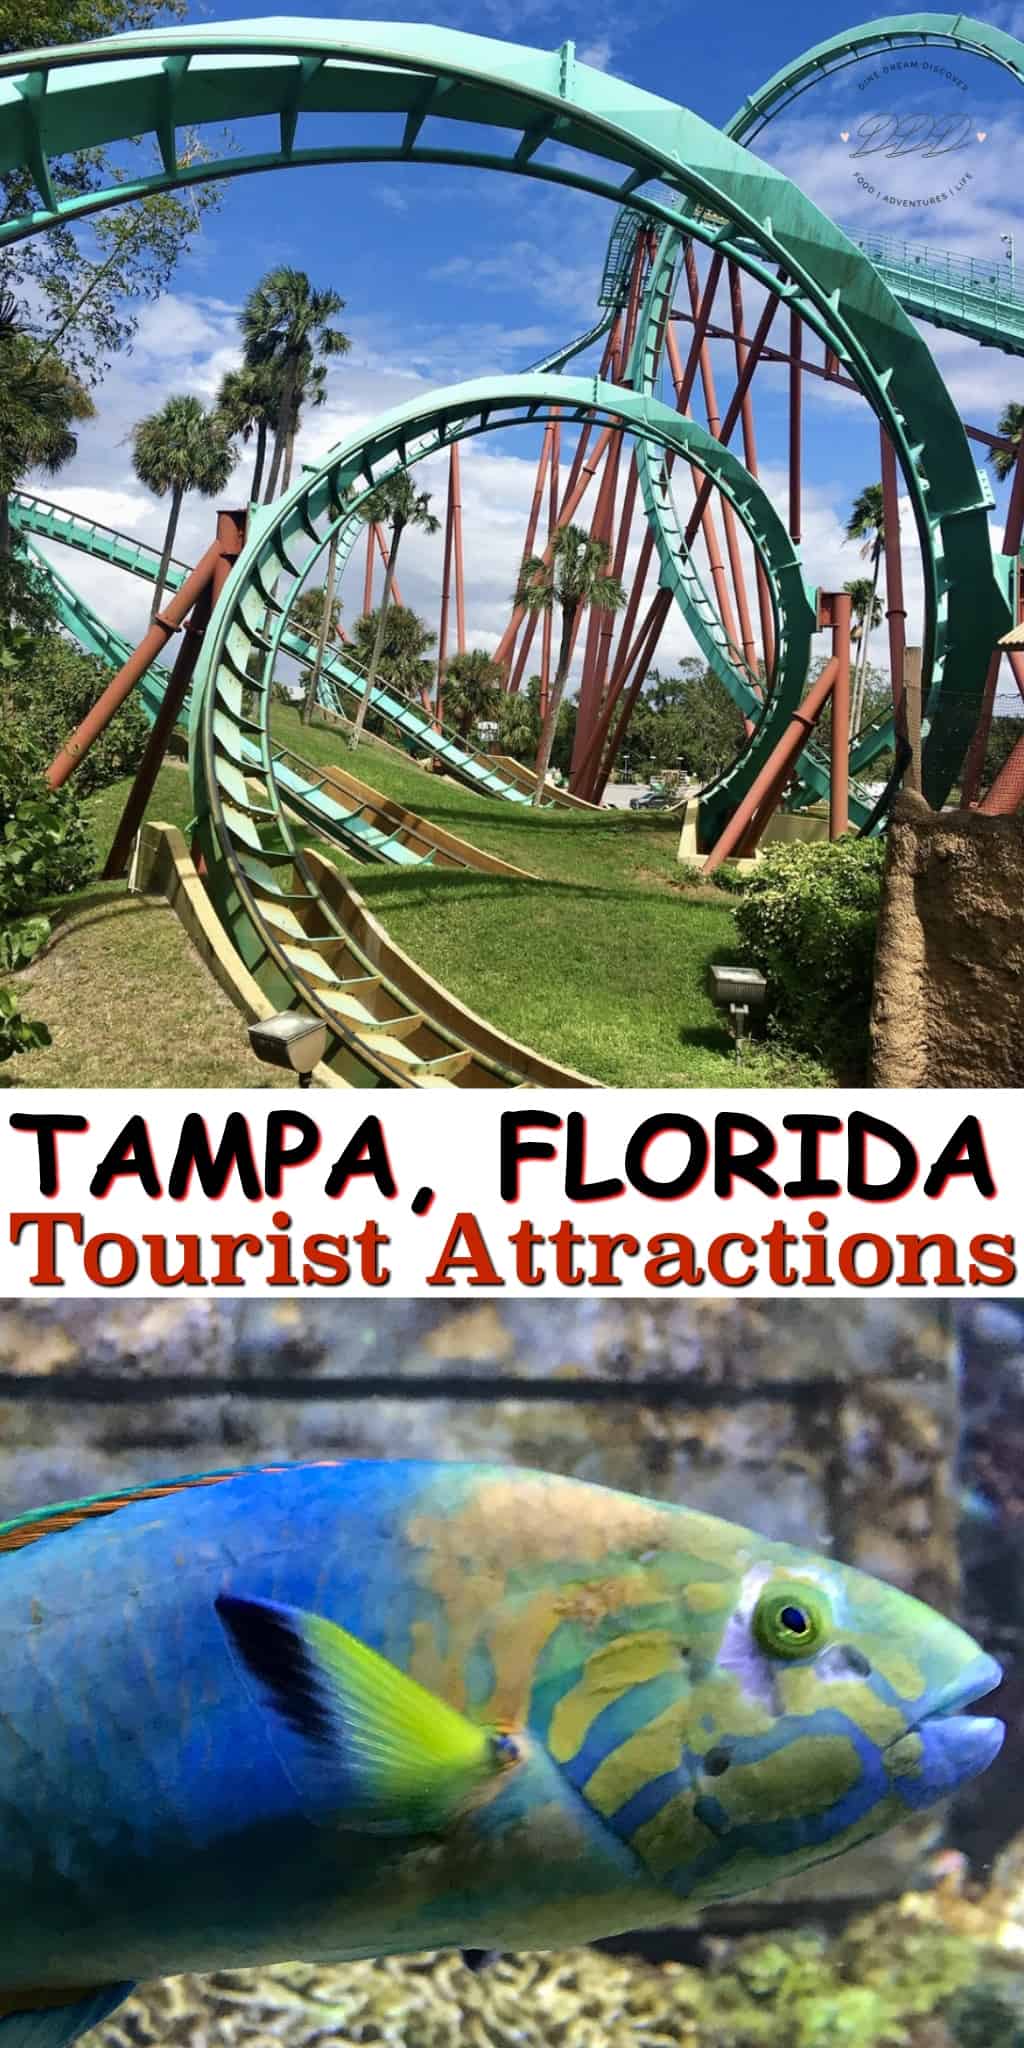 Tampa, Florida Tourist Attractions offers something for everyone From museums and theme parks to a fantastic nightlife, Tampa has it all.